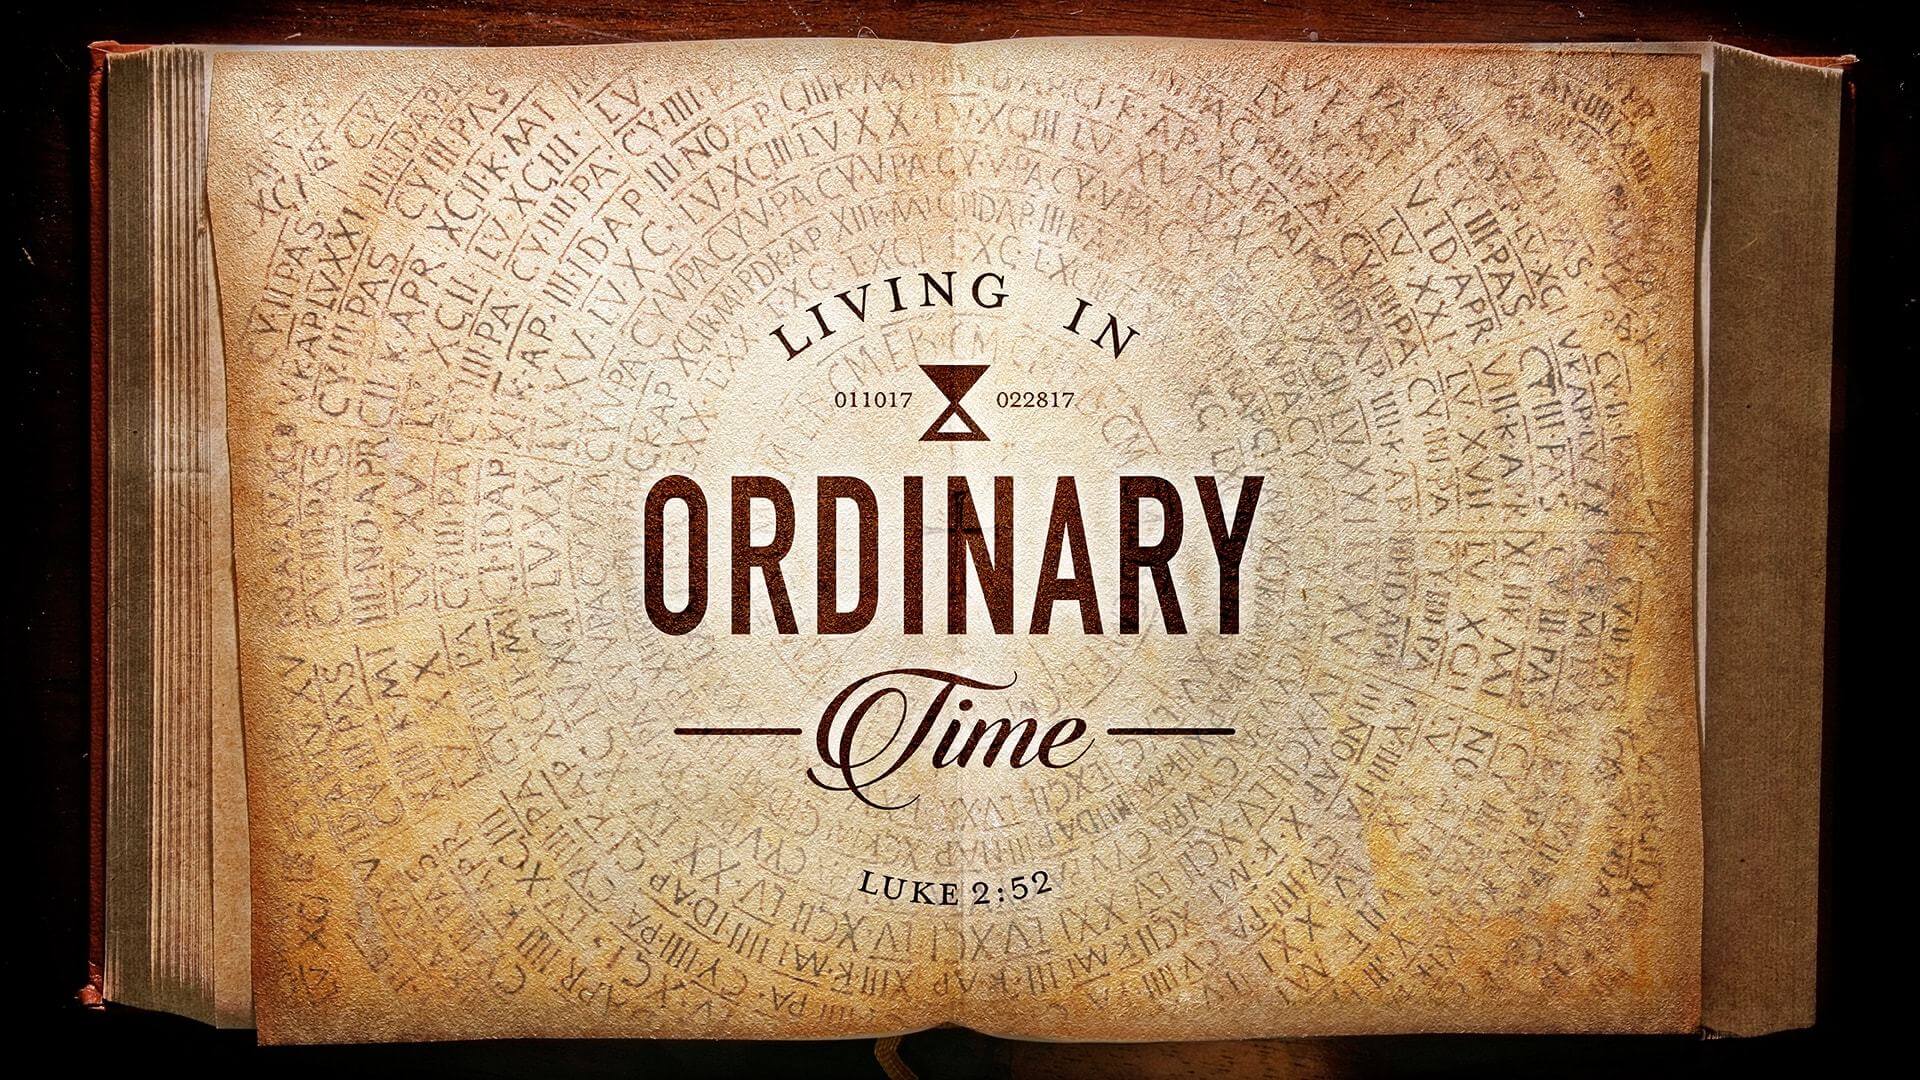 living-in-ordinary-time-1920x1080-1.jpg